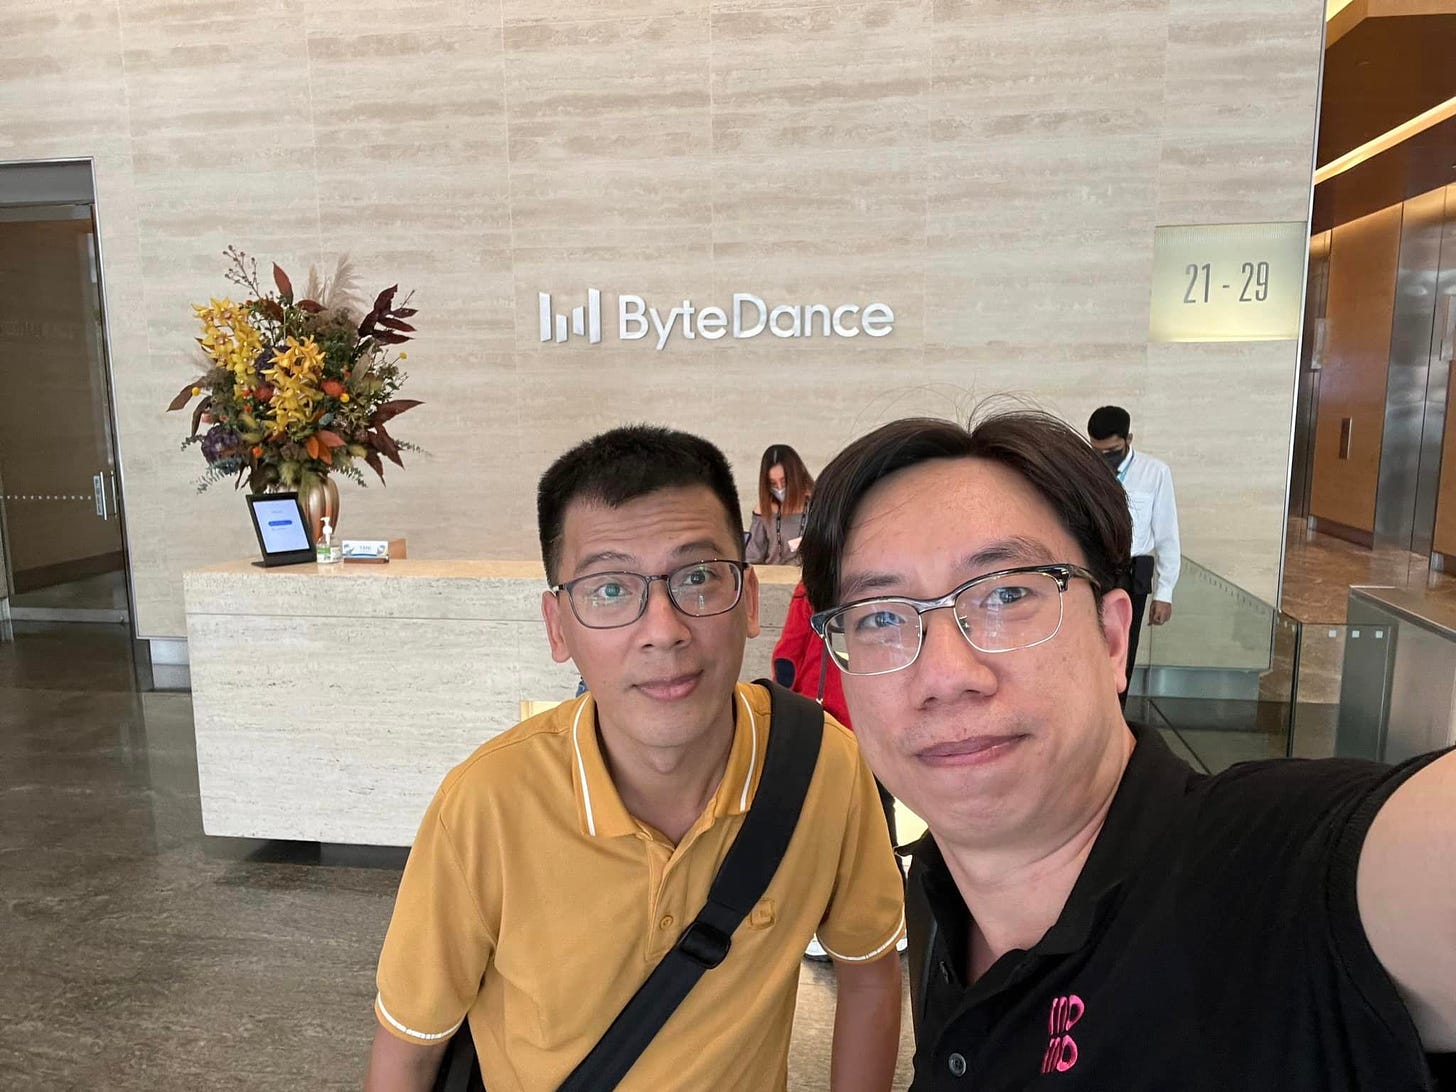 May be an image of 2 people, people standing, glasses, indoor and text that says "川 ByteDance 21-29"